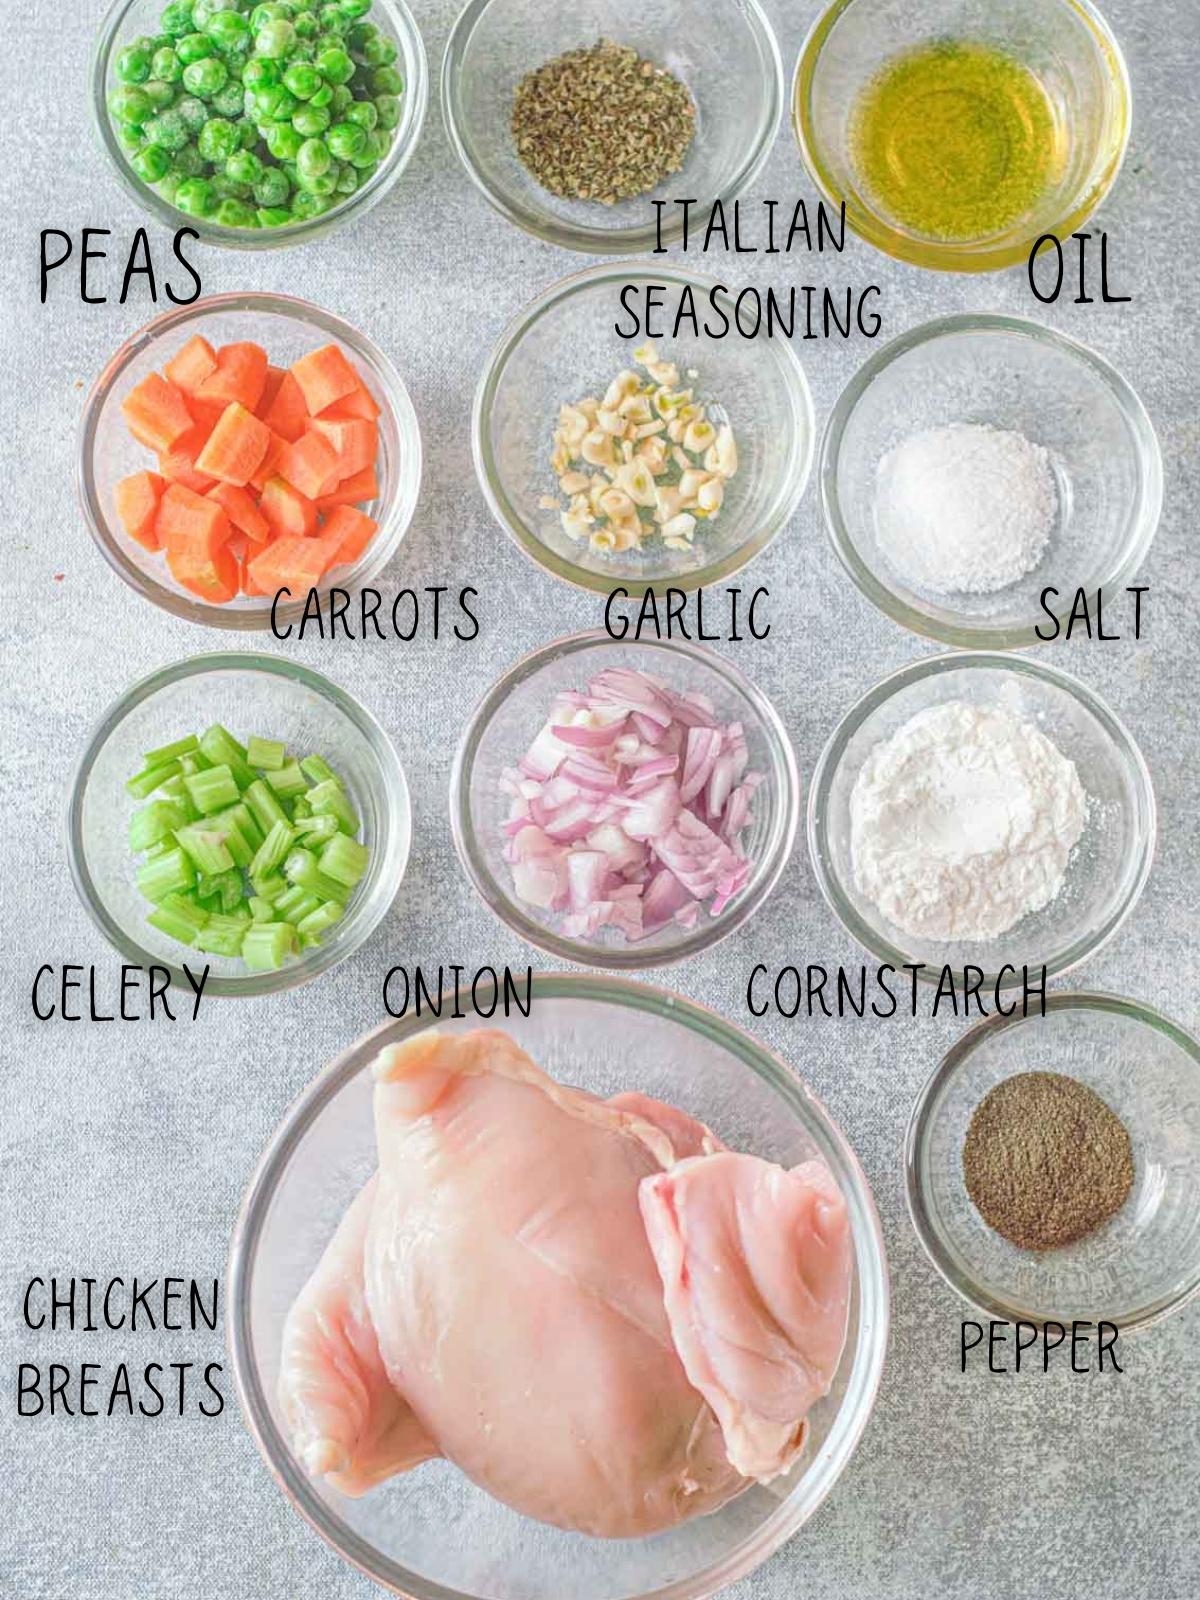 ingredients for instant pot chicken and dumplings, including peas, carrots, potatoes, garlic, onion and celery